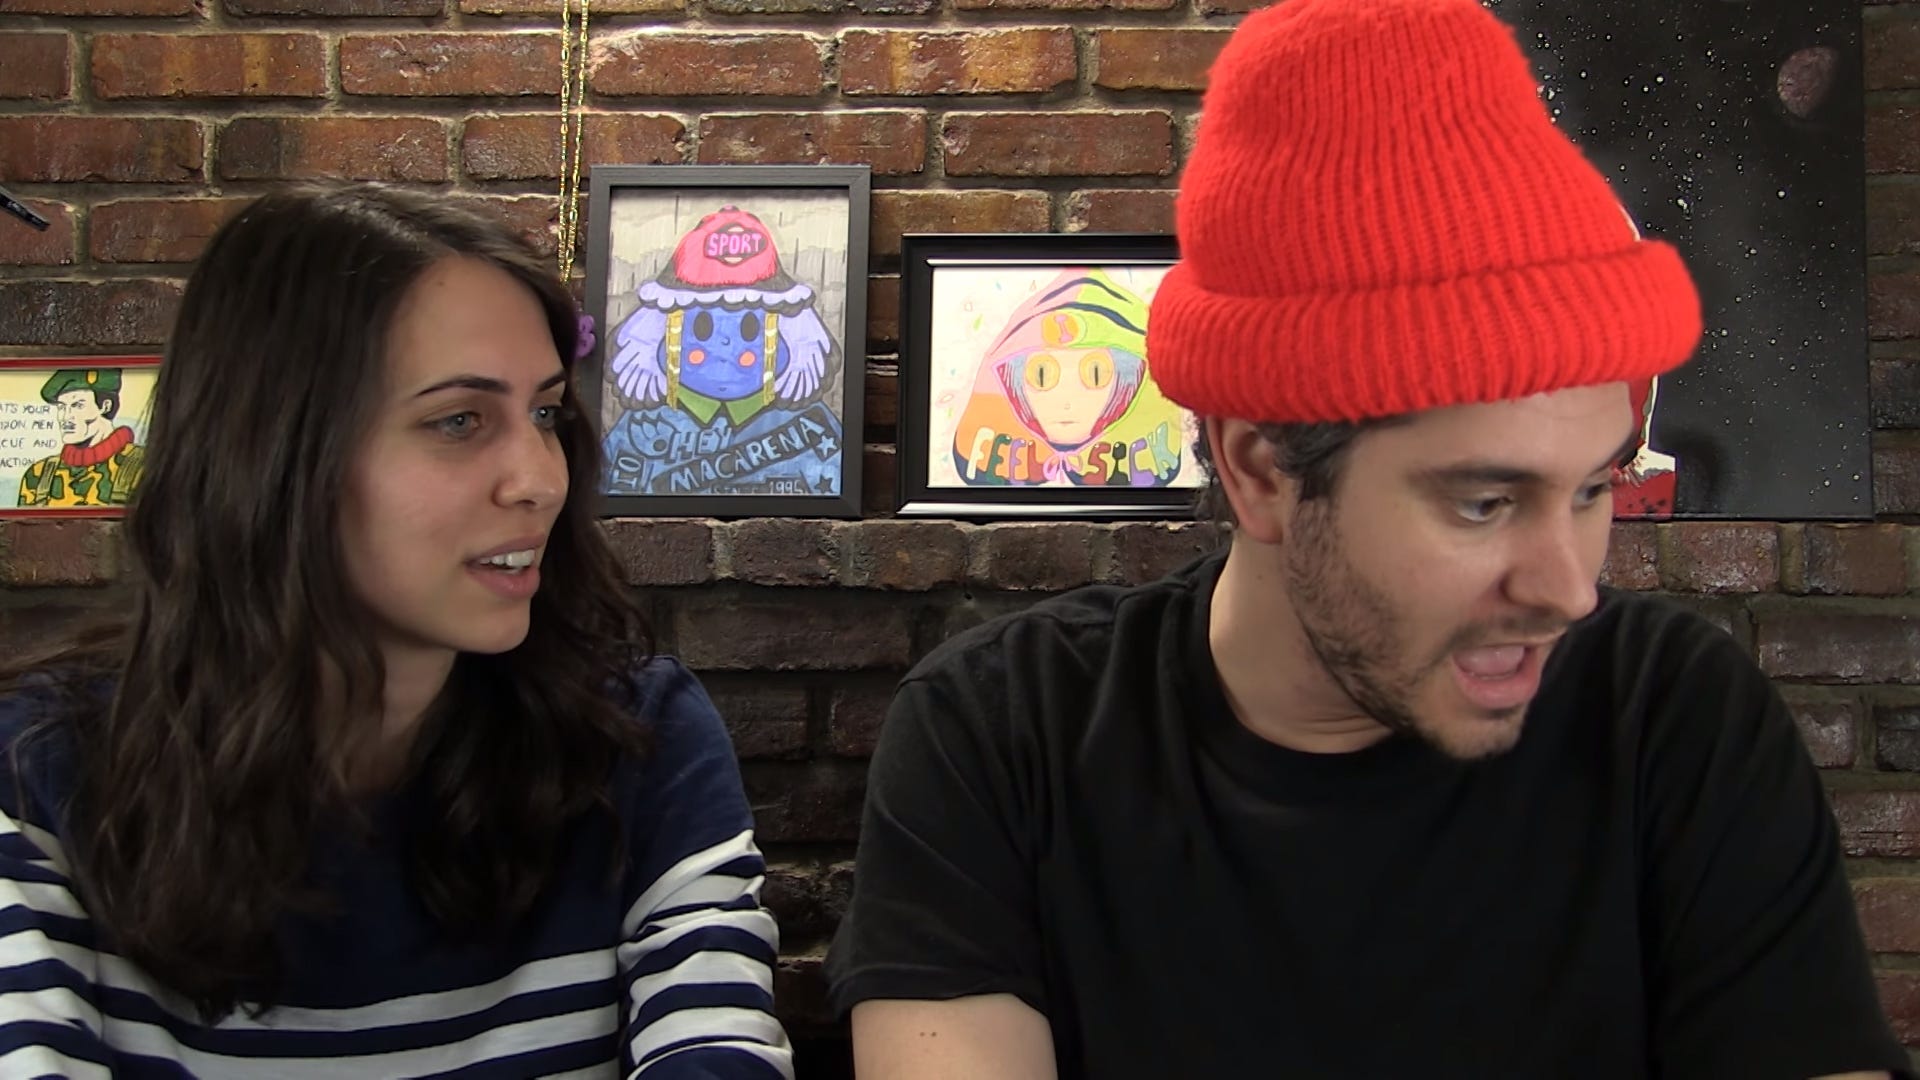 H3h3 Productions Strengthens Fair Use On YouTube.